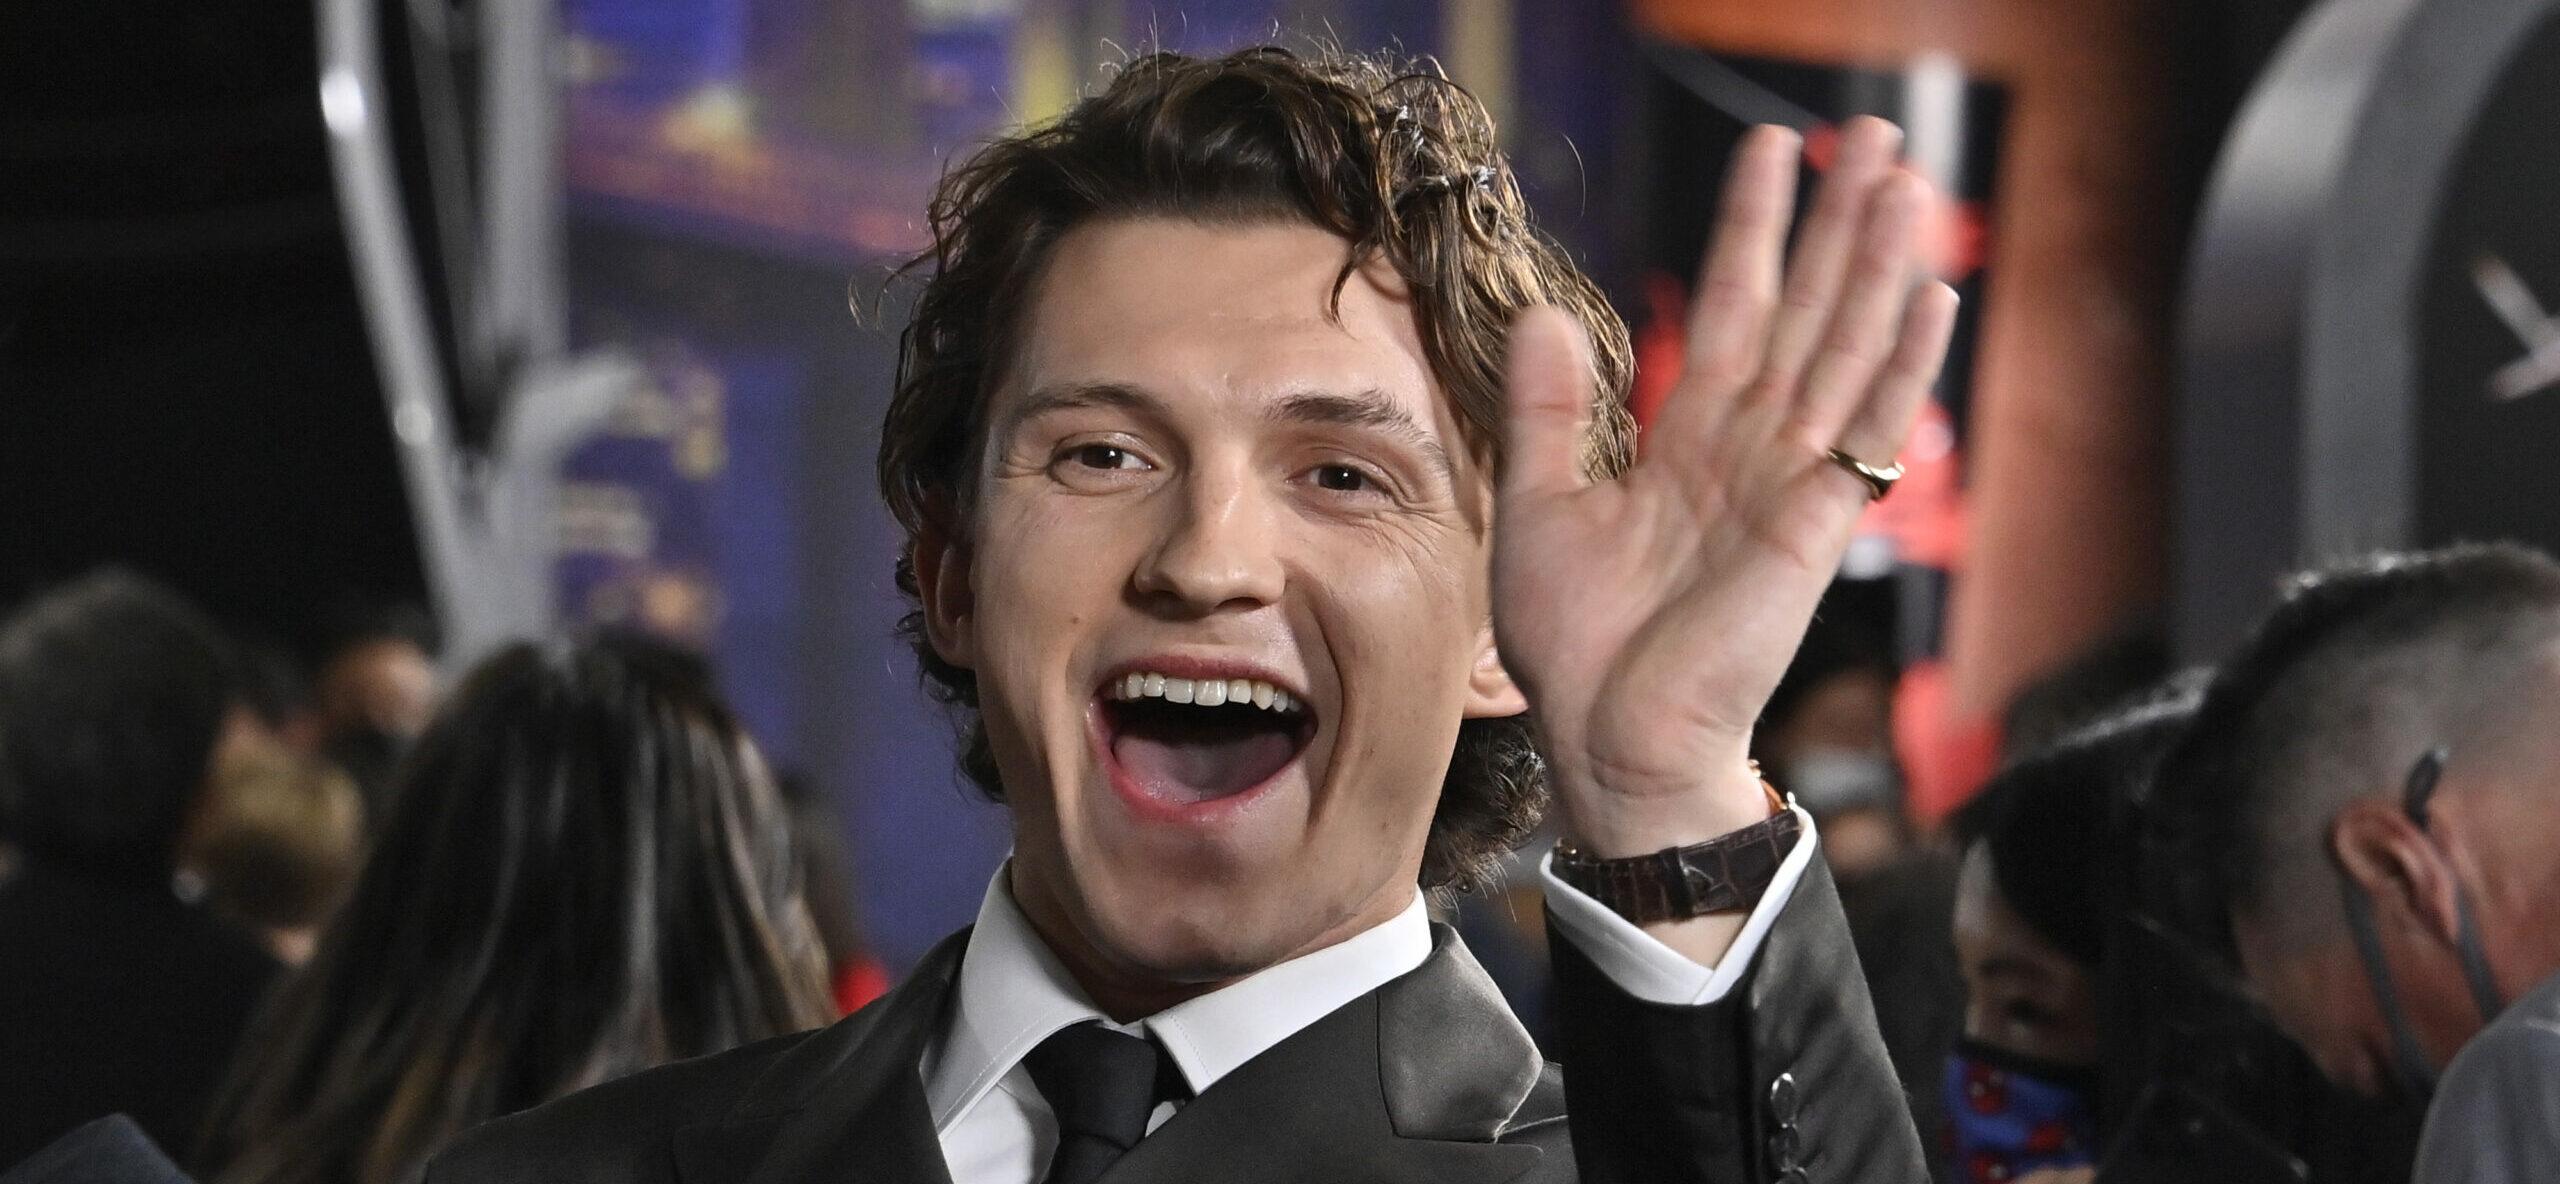 Tom Holland attends the premiere of the sci-fi motion picture "Spider-Man: No Way Home"